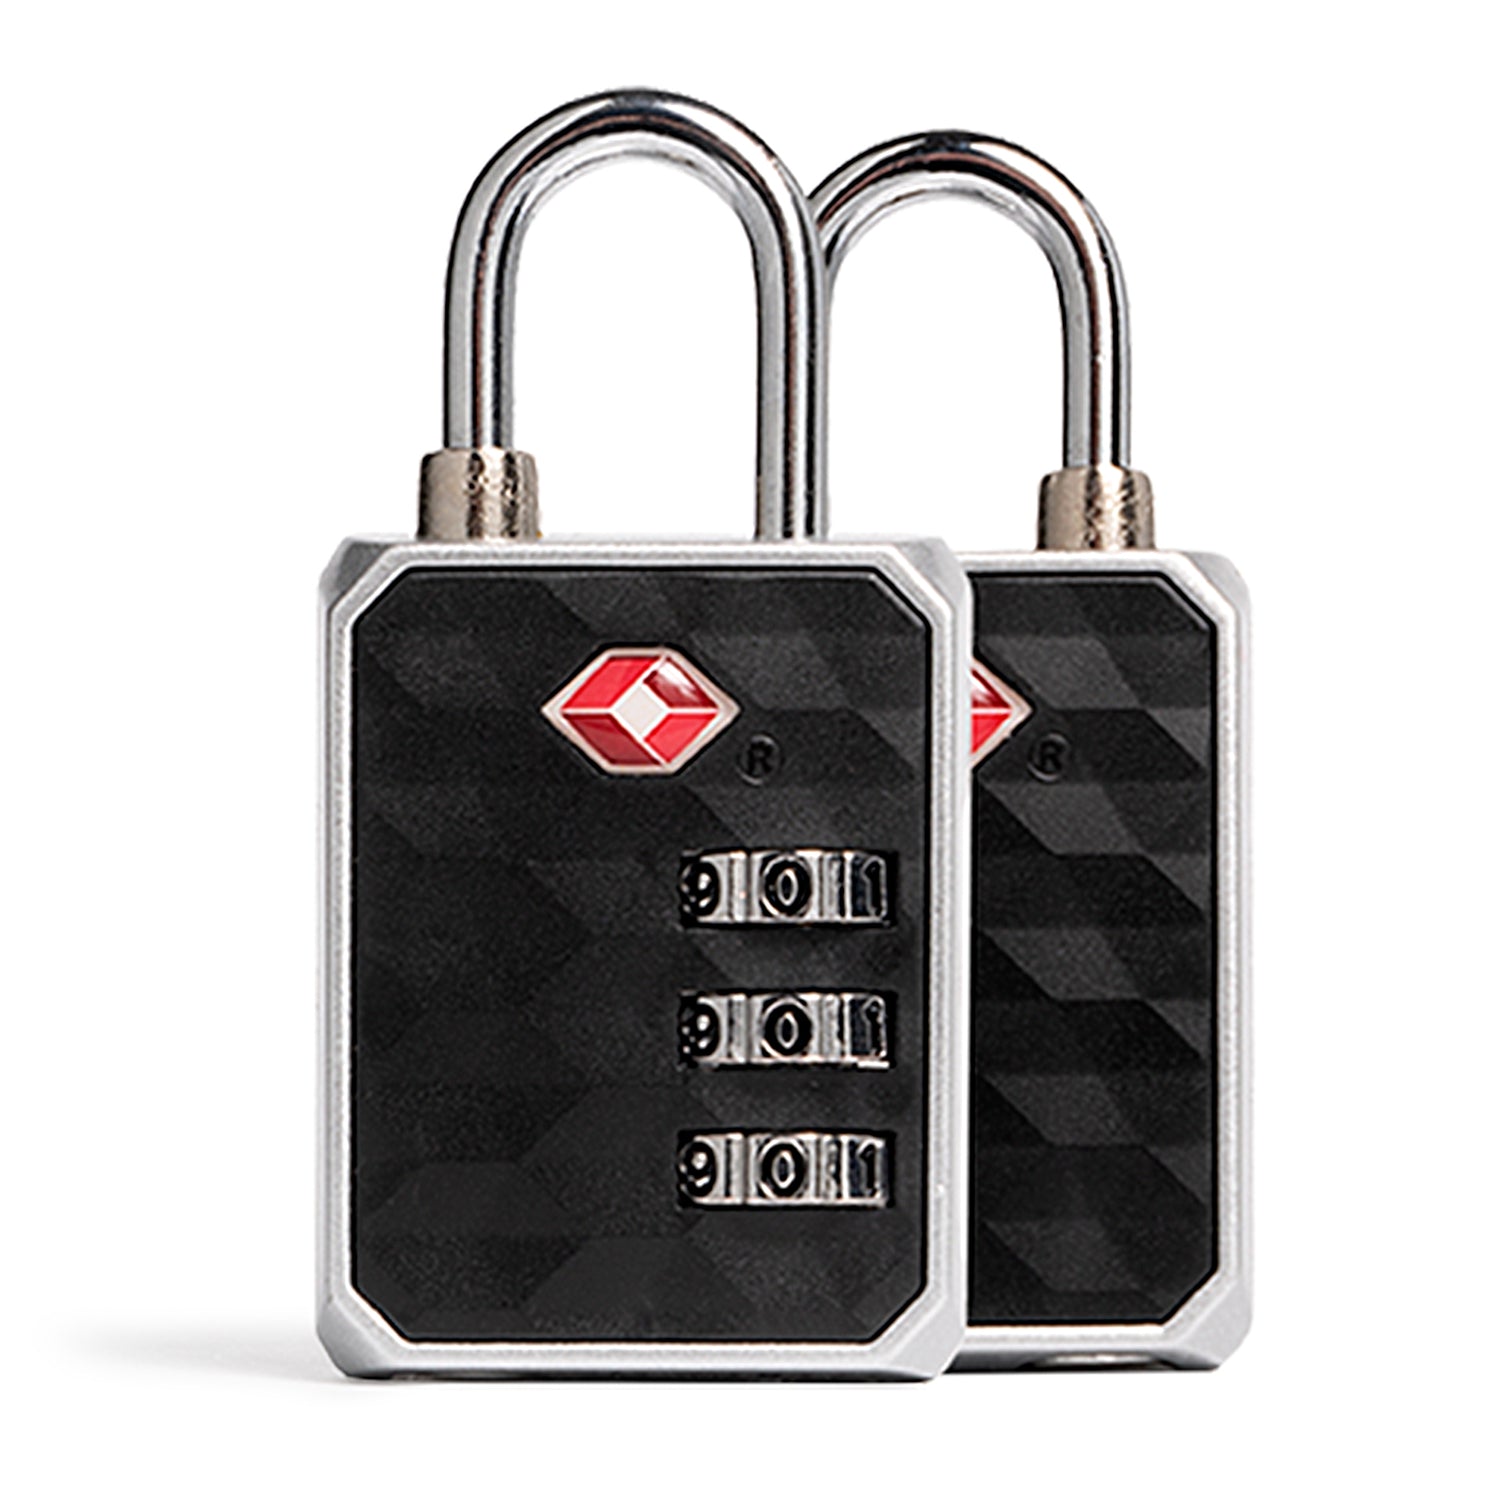 Front of 2 black and metallic tsa-approved locks designed by Tracker on white background, showcasing its 3-dial feature and red TSA logo.